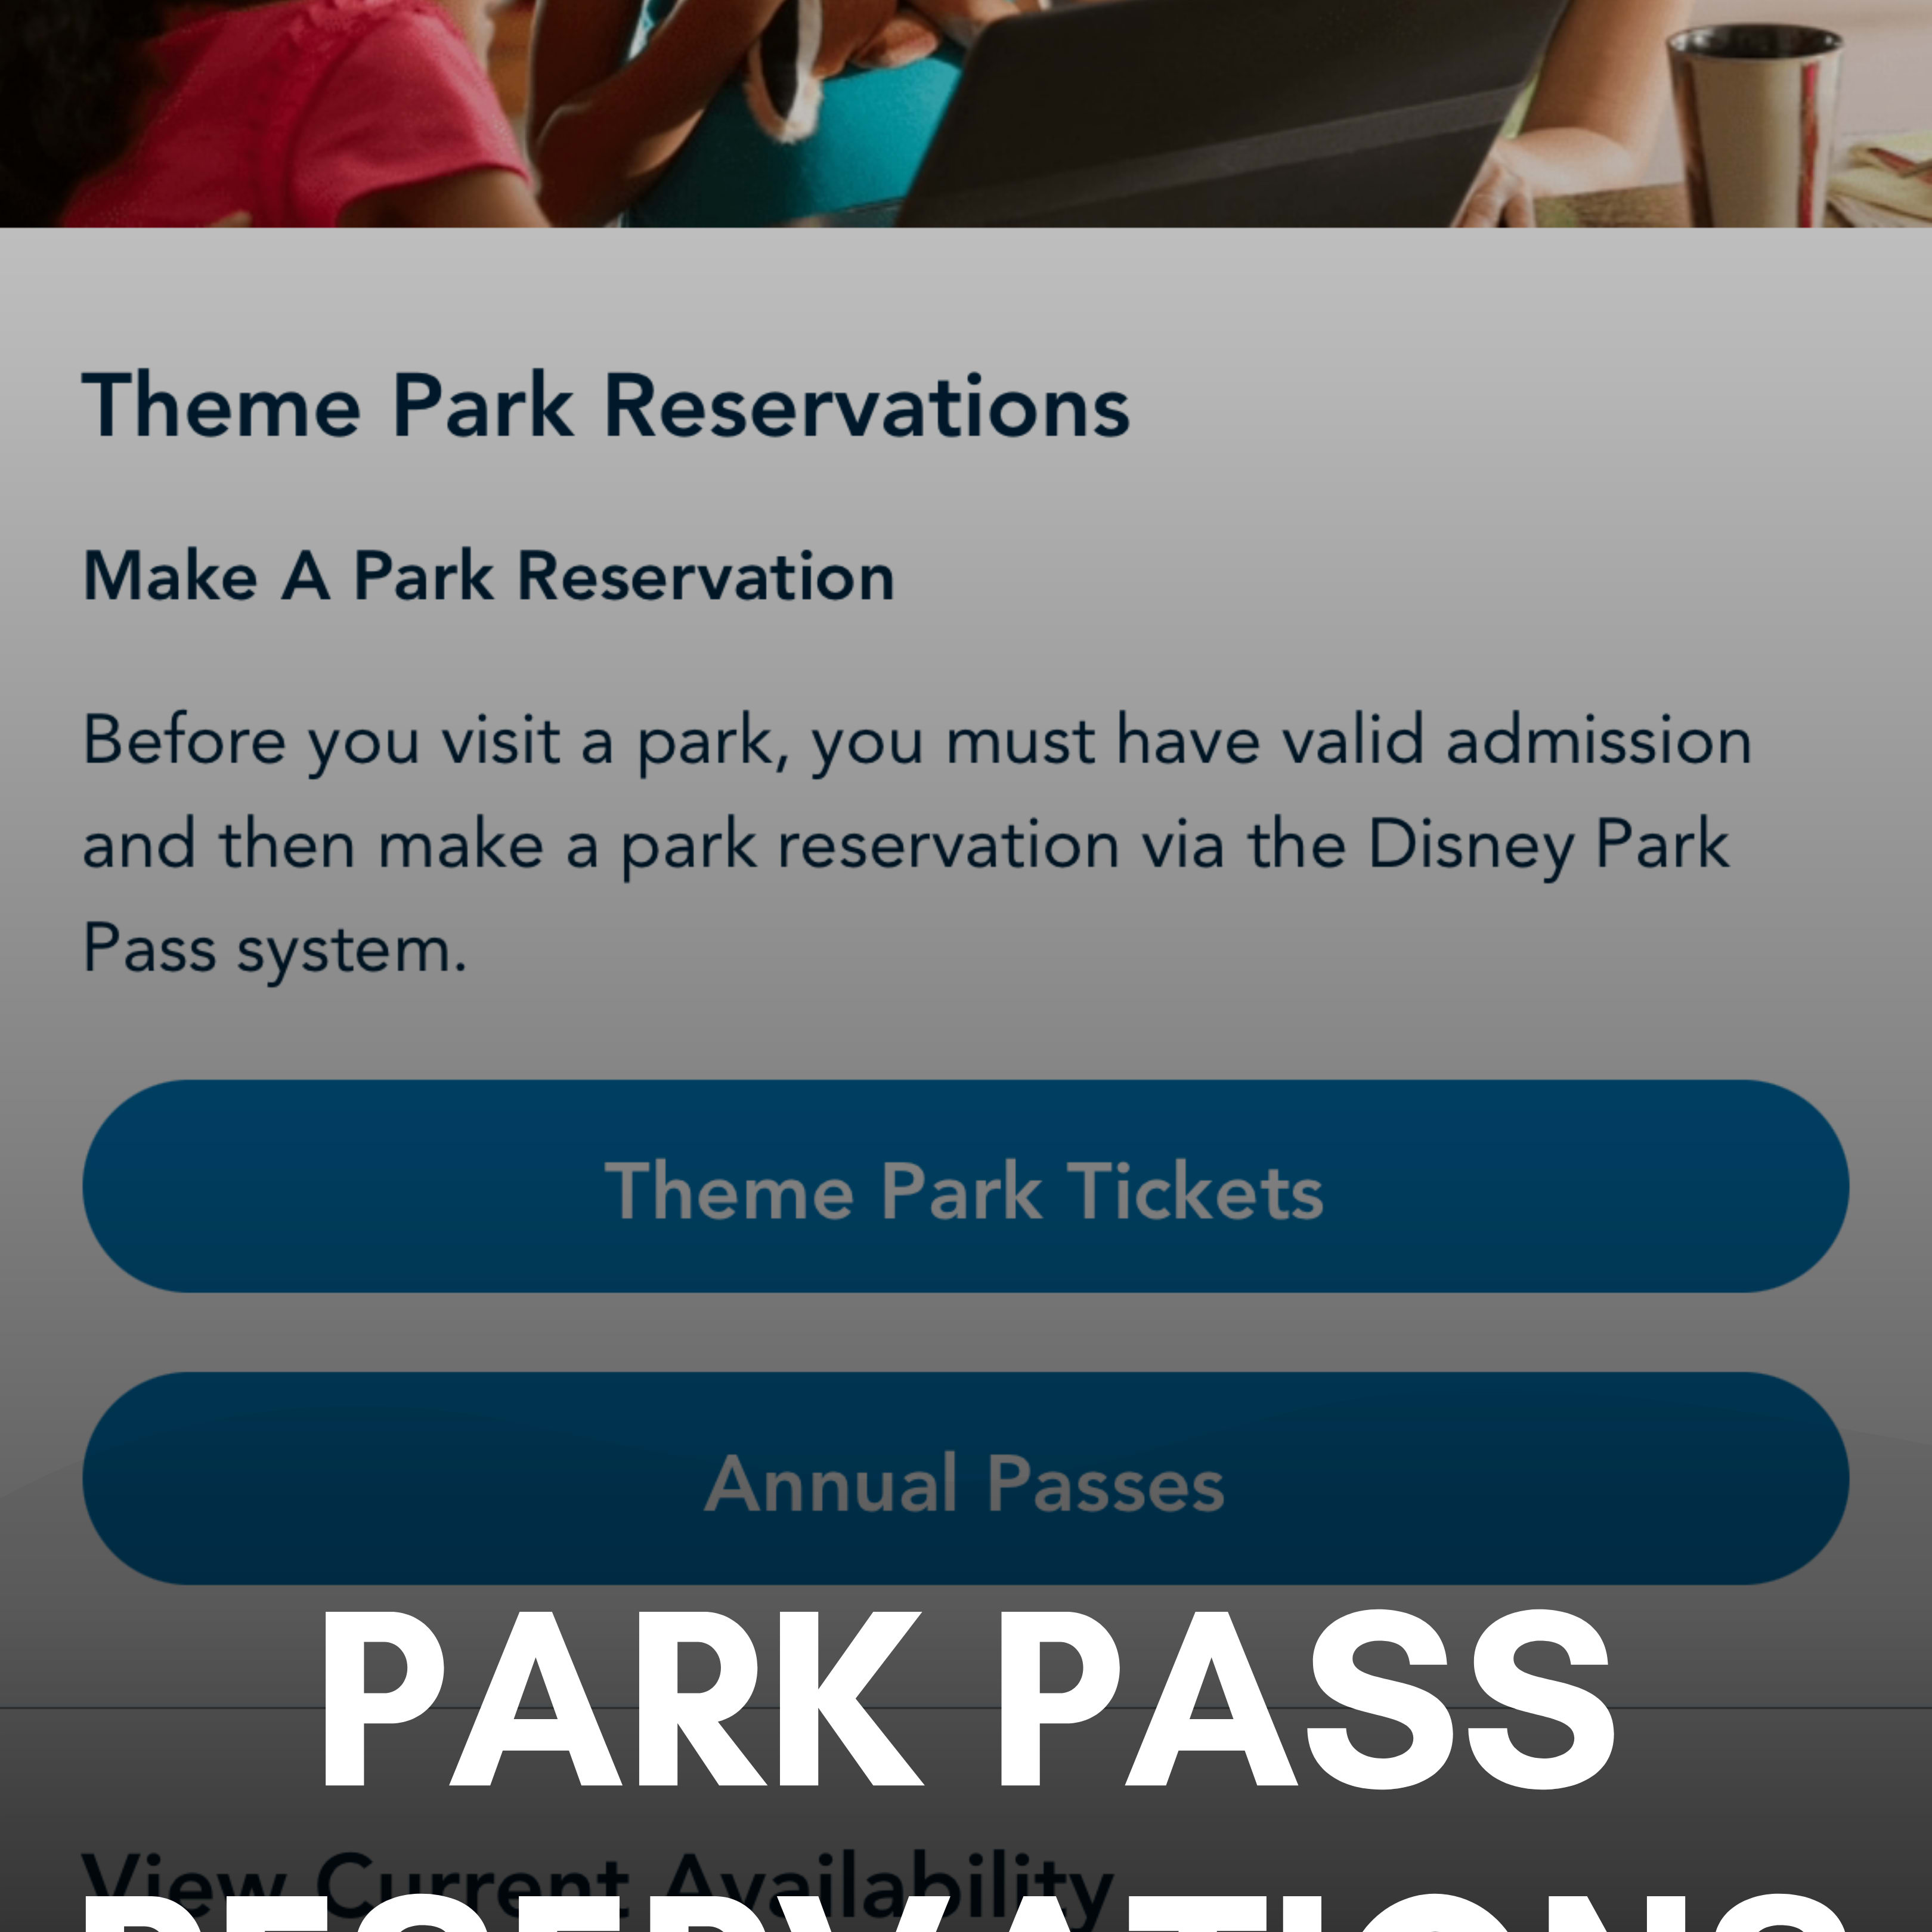 Disney World Park Pass Reservations: Everything You Need Know - DVC Shop